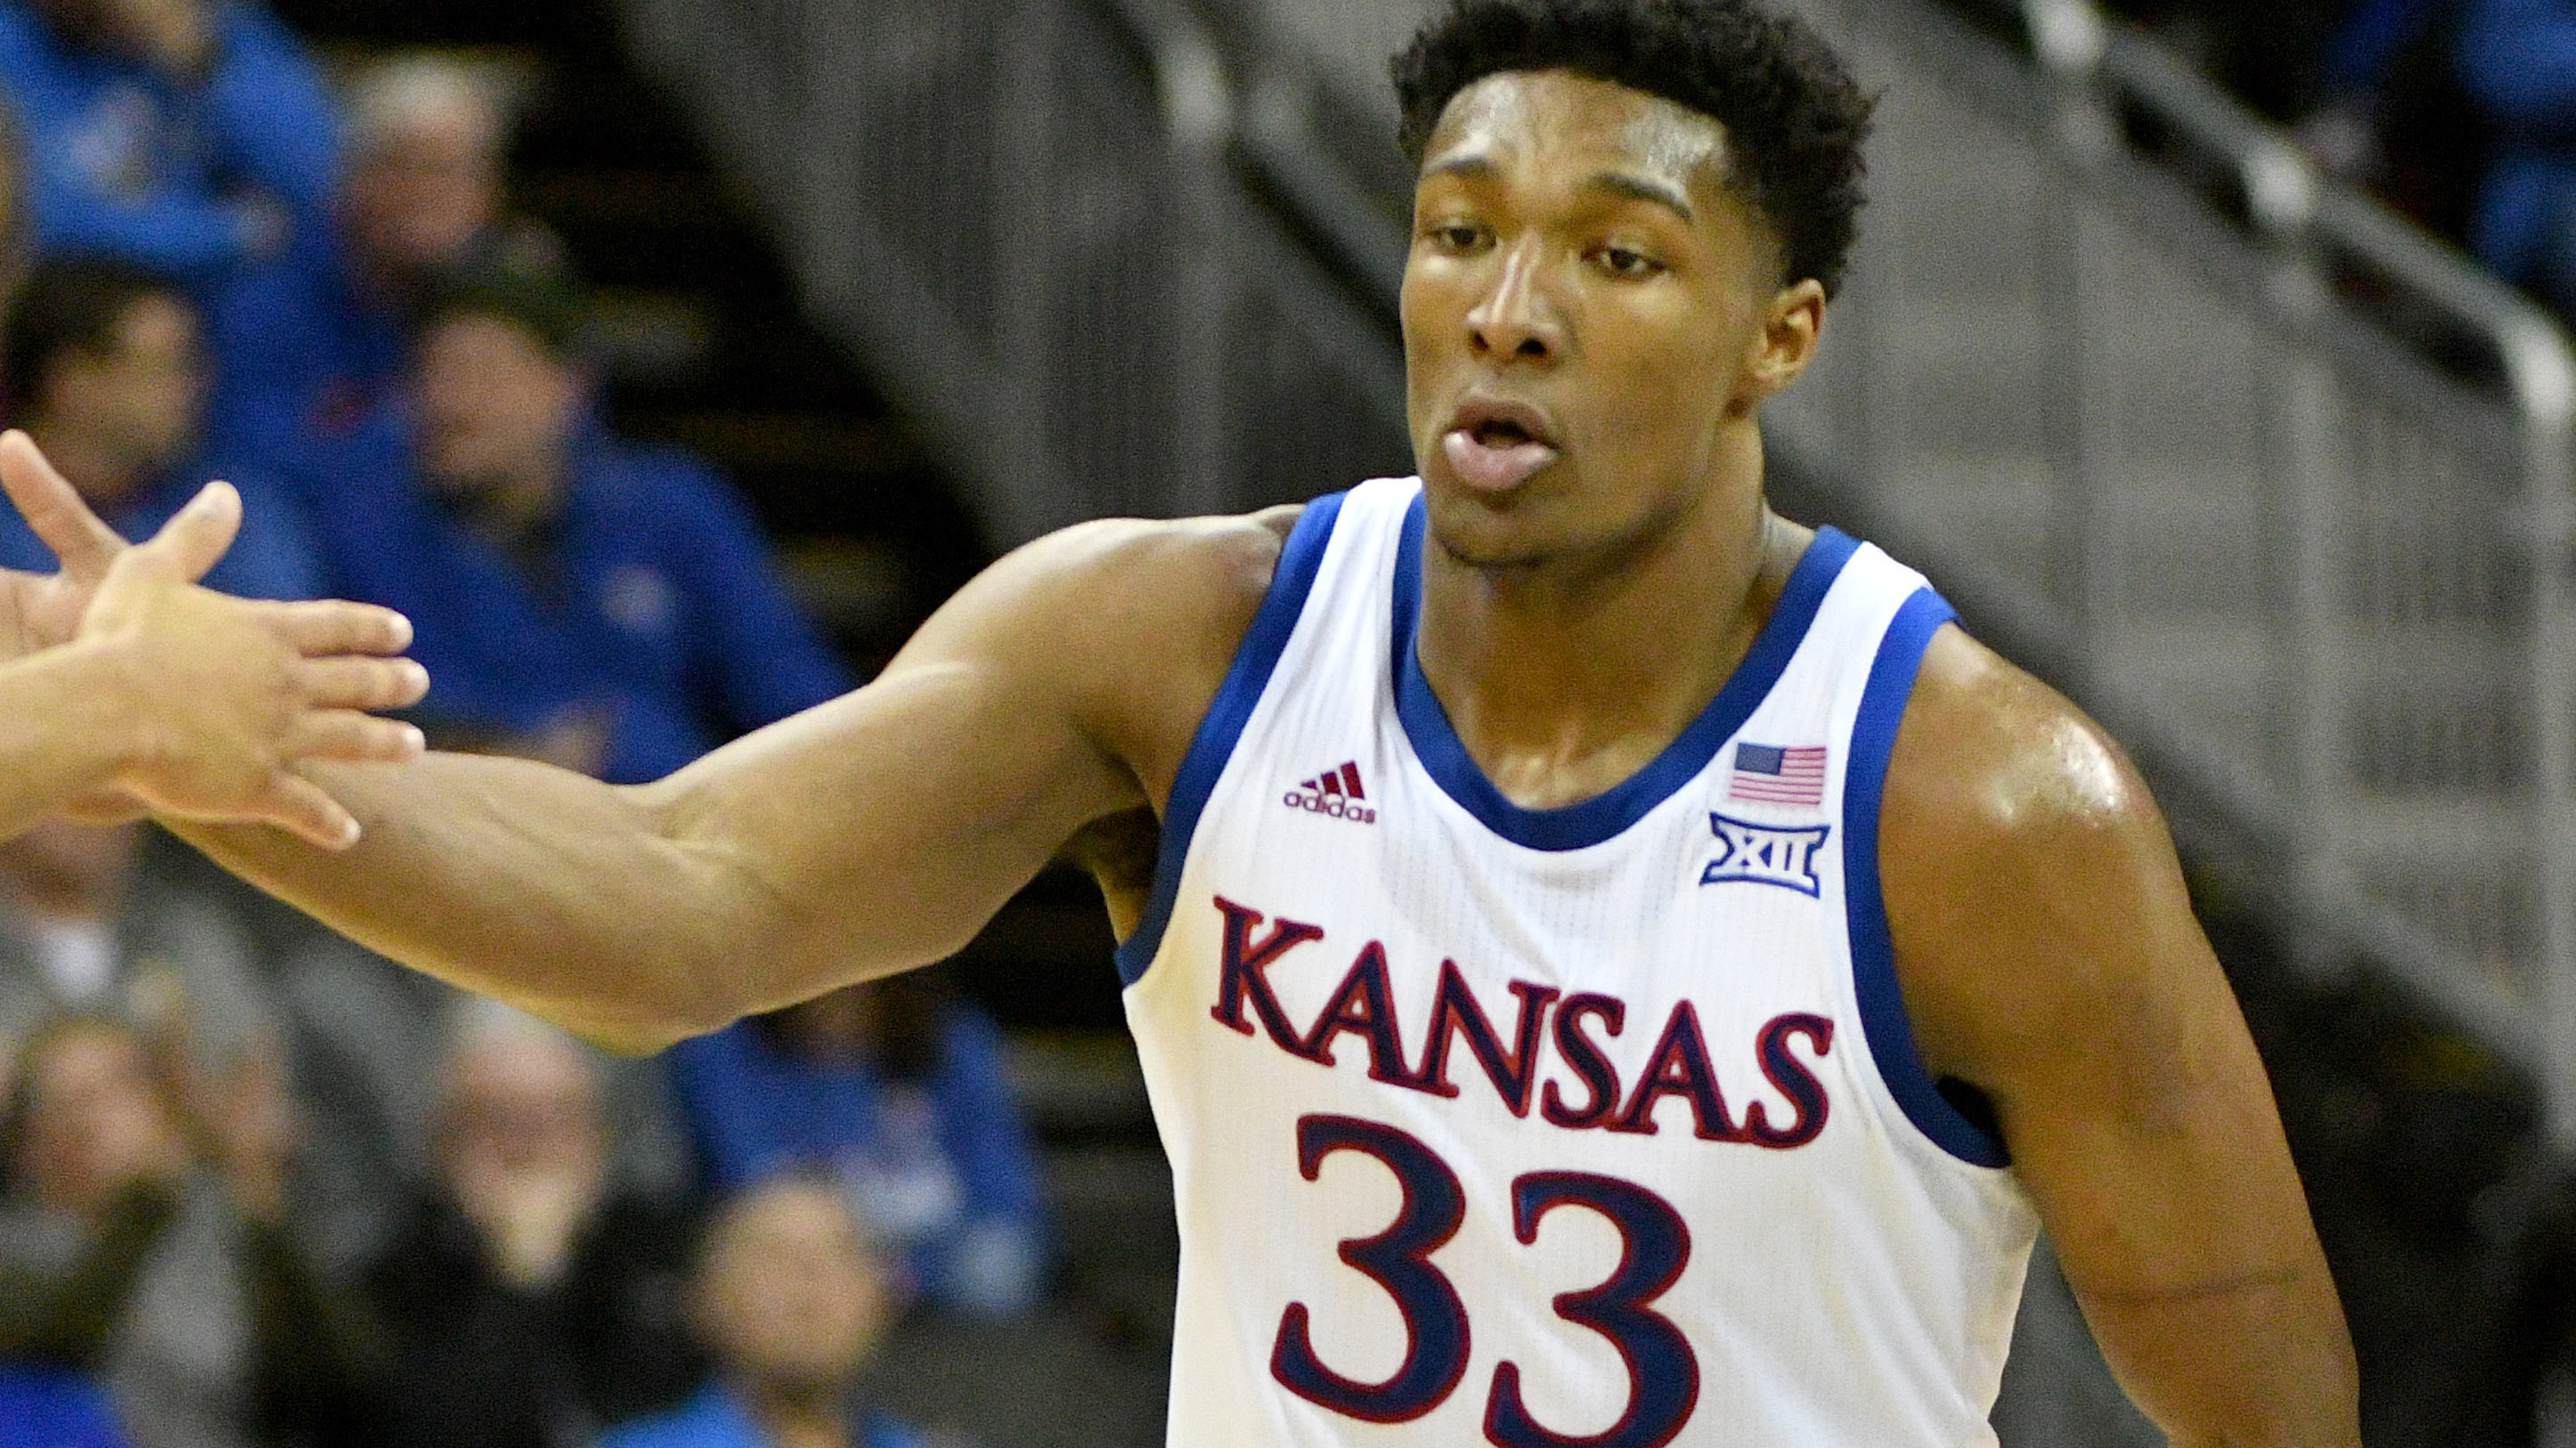 McCormack's 28 points lift No. 2 Kansas to 98-57 rout of UMKC